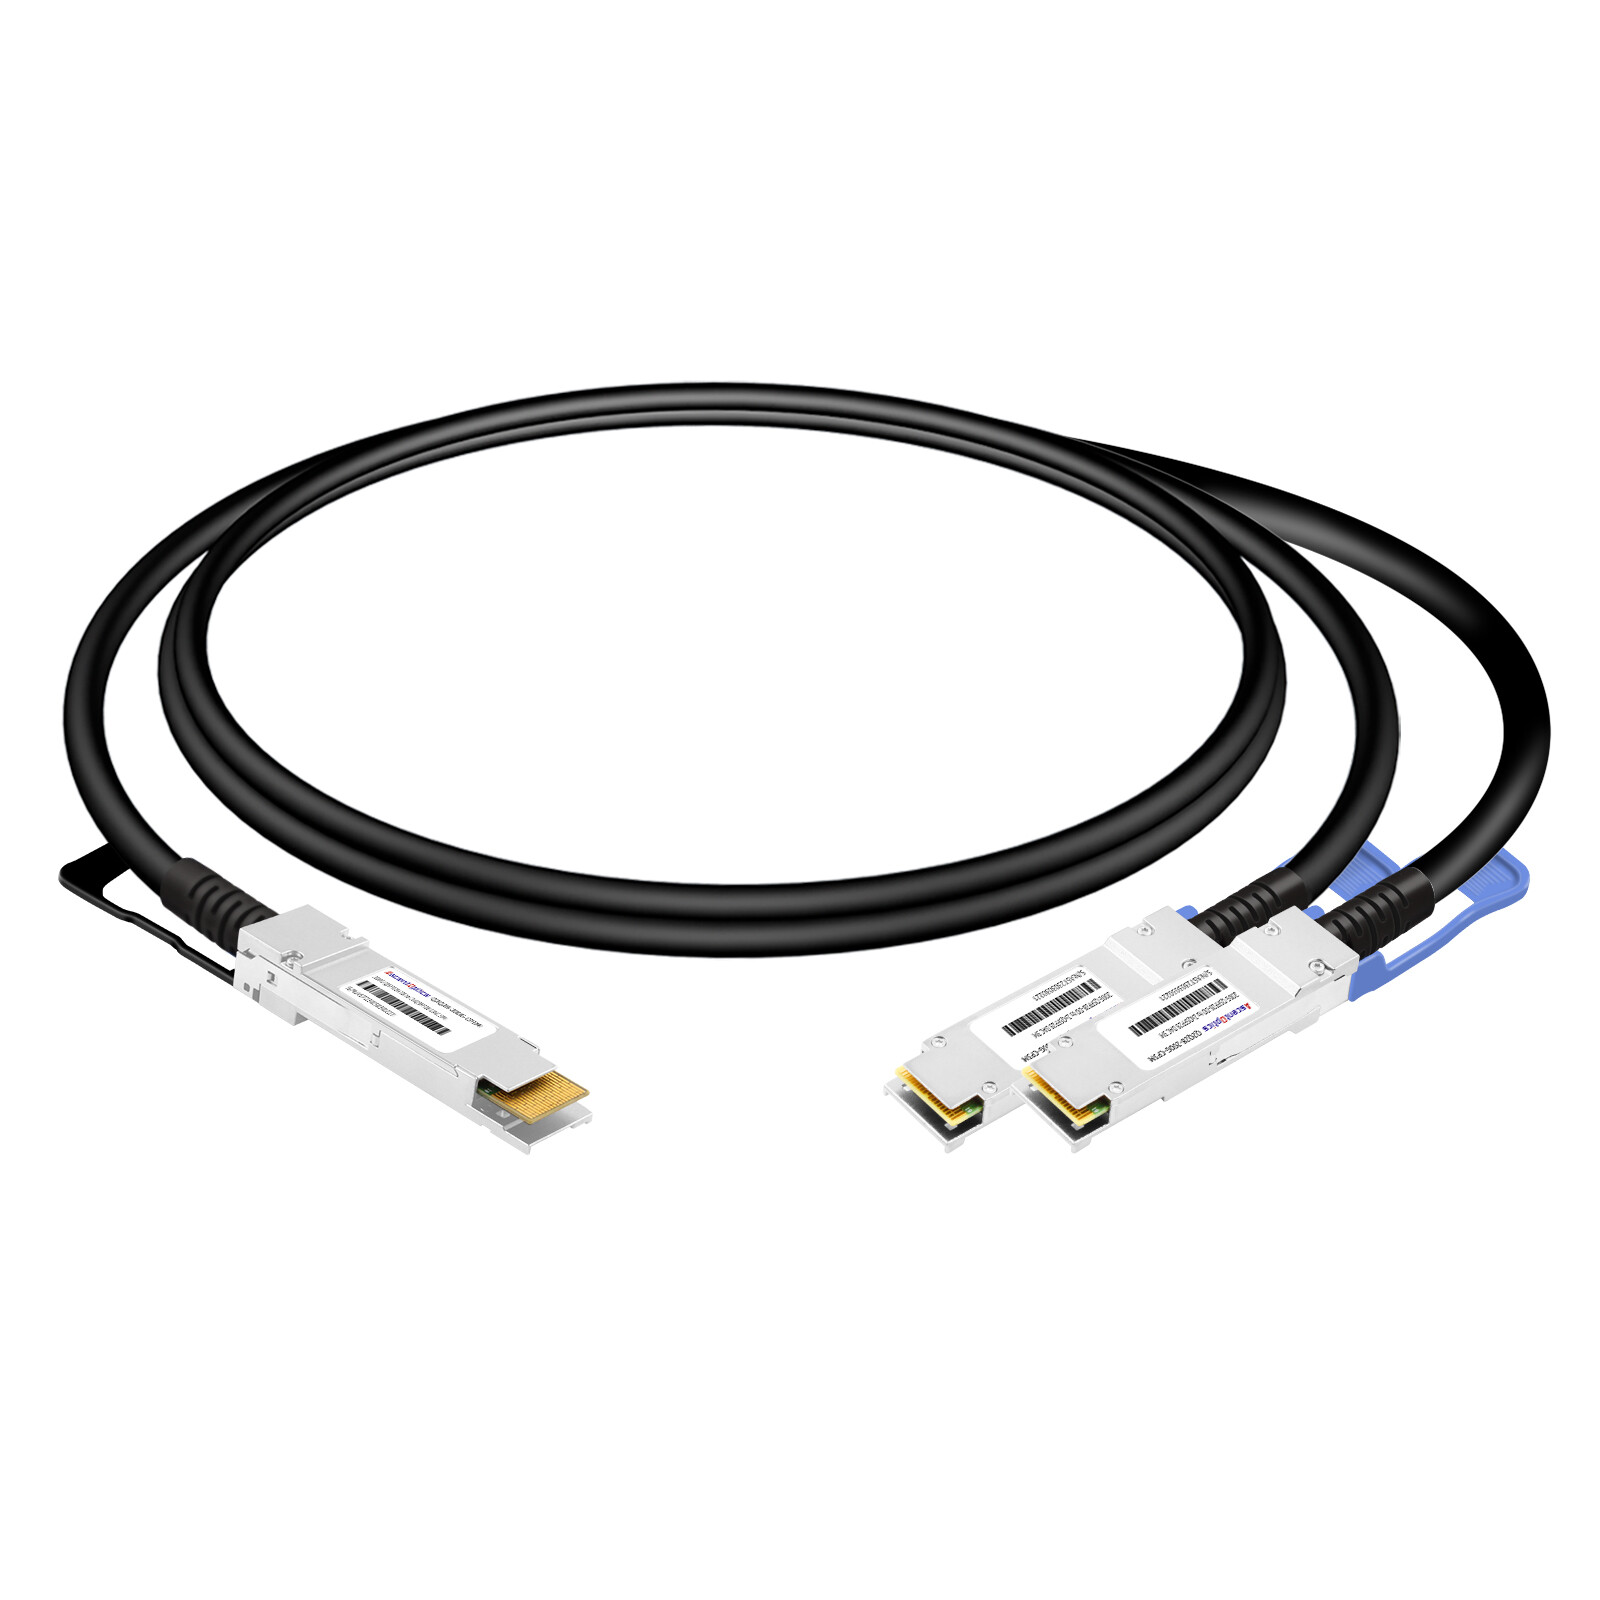 200G QSFP28-DD to 2x 100G QSFP28 Copper Breakout Cable,3 Meters,Passive